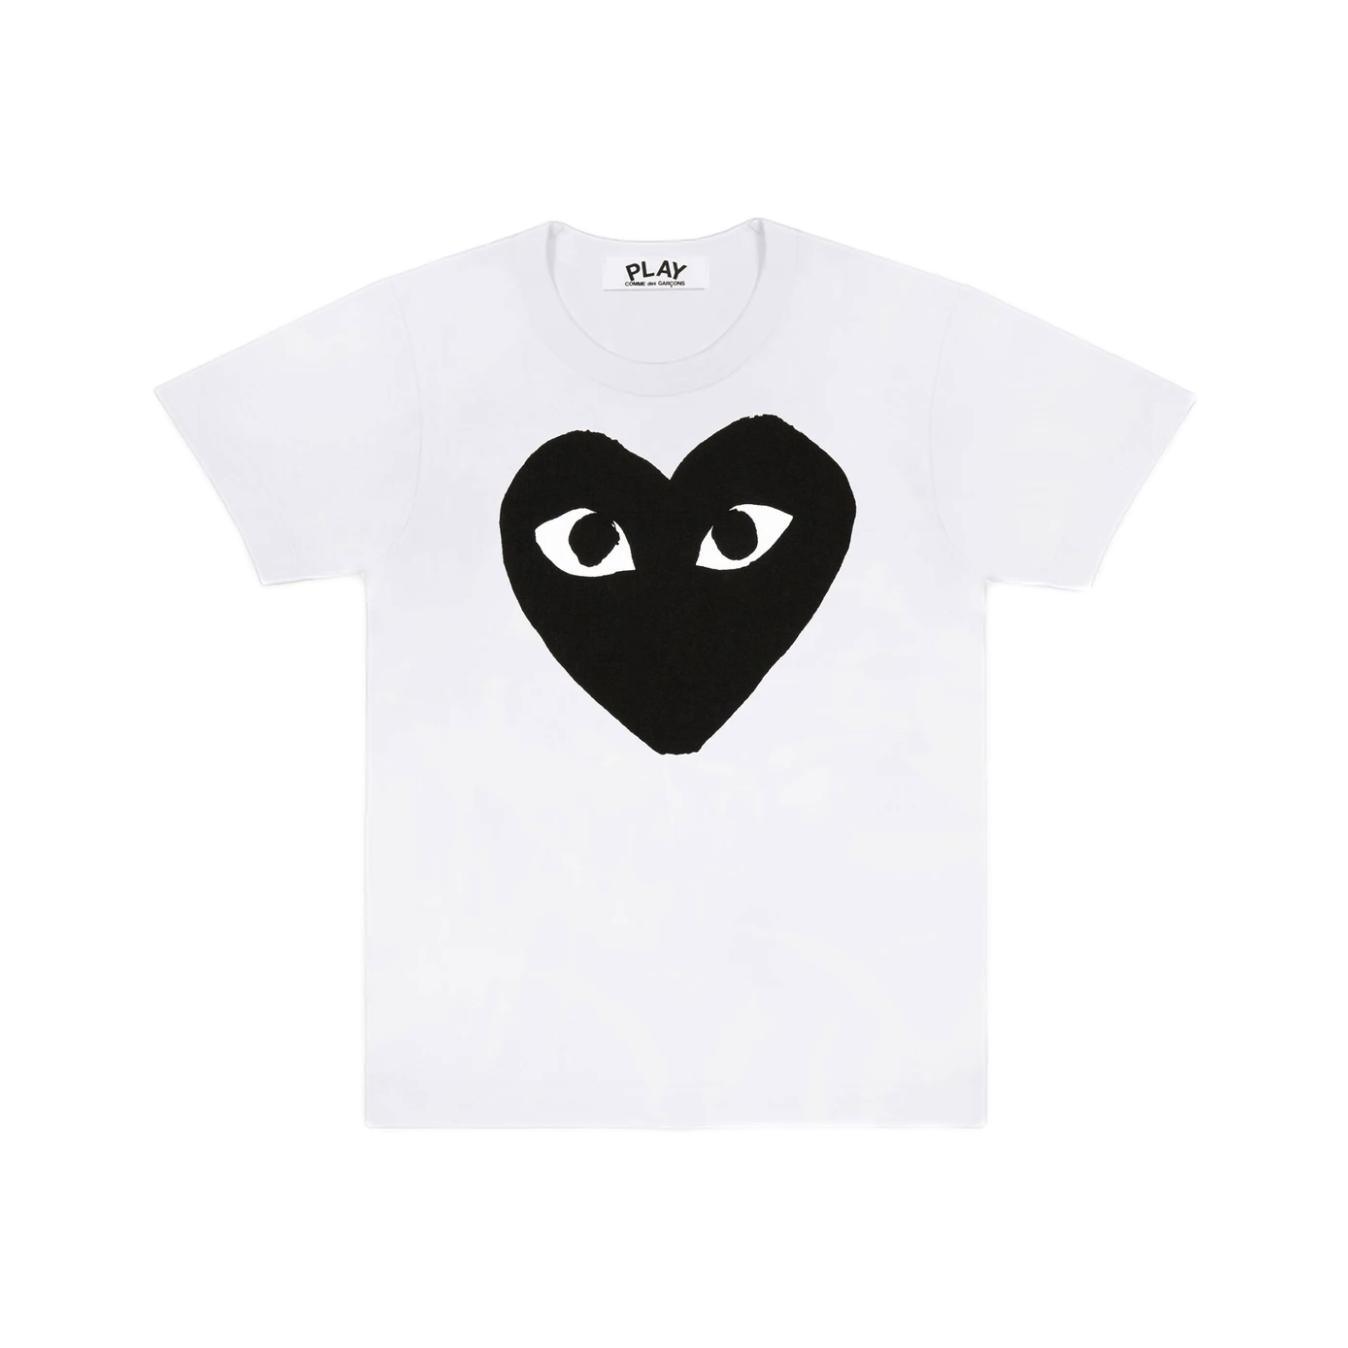 COMME DES GARCONS PLAY BLACK HEART T-SHIRT - Gravity NYC